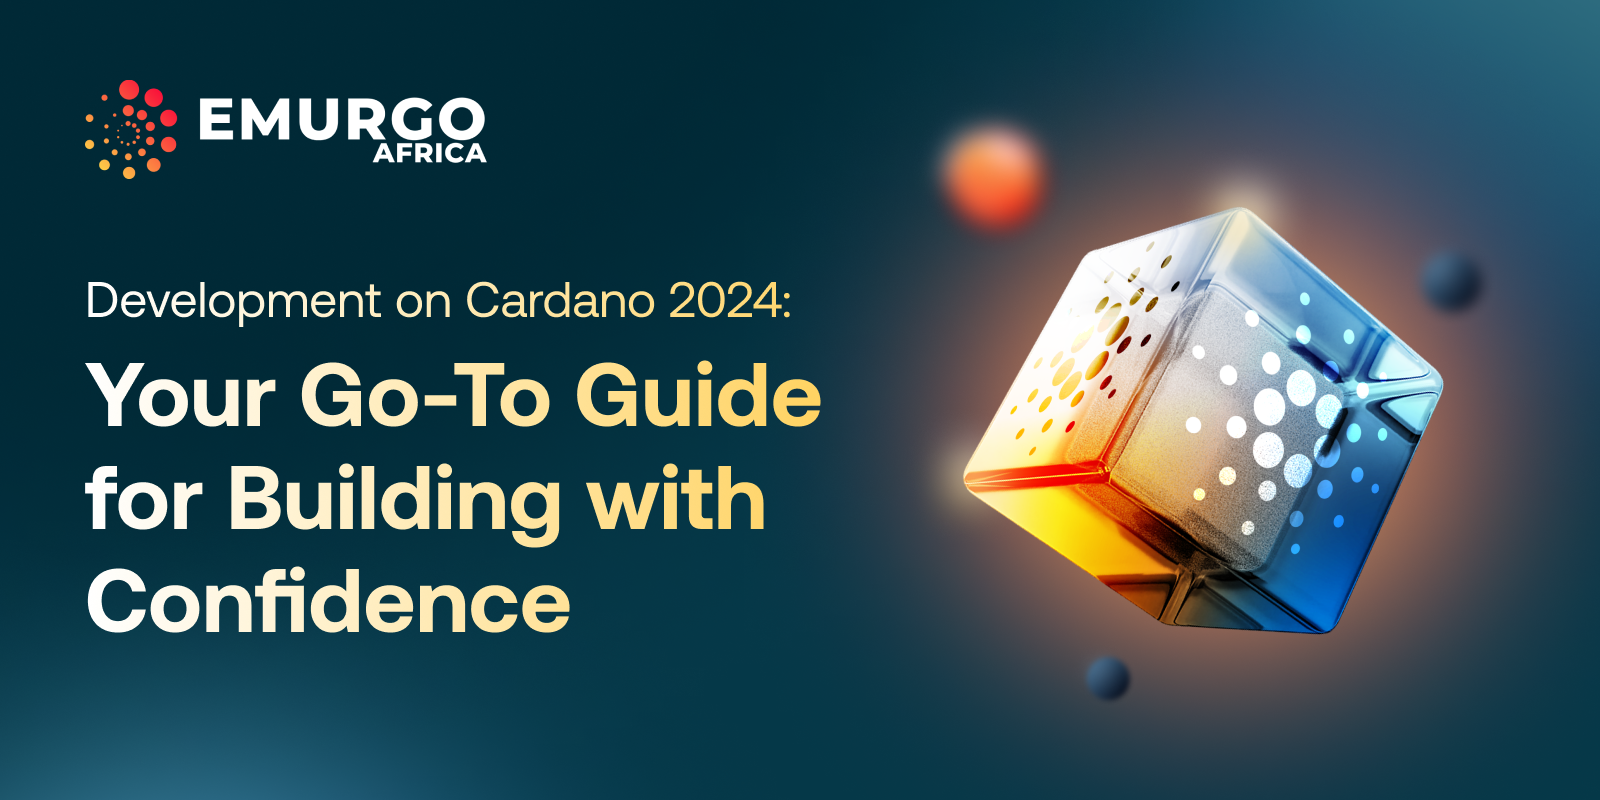 Development on Cardano 2024: Your Go-To Guide for Building with Confidence!